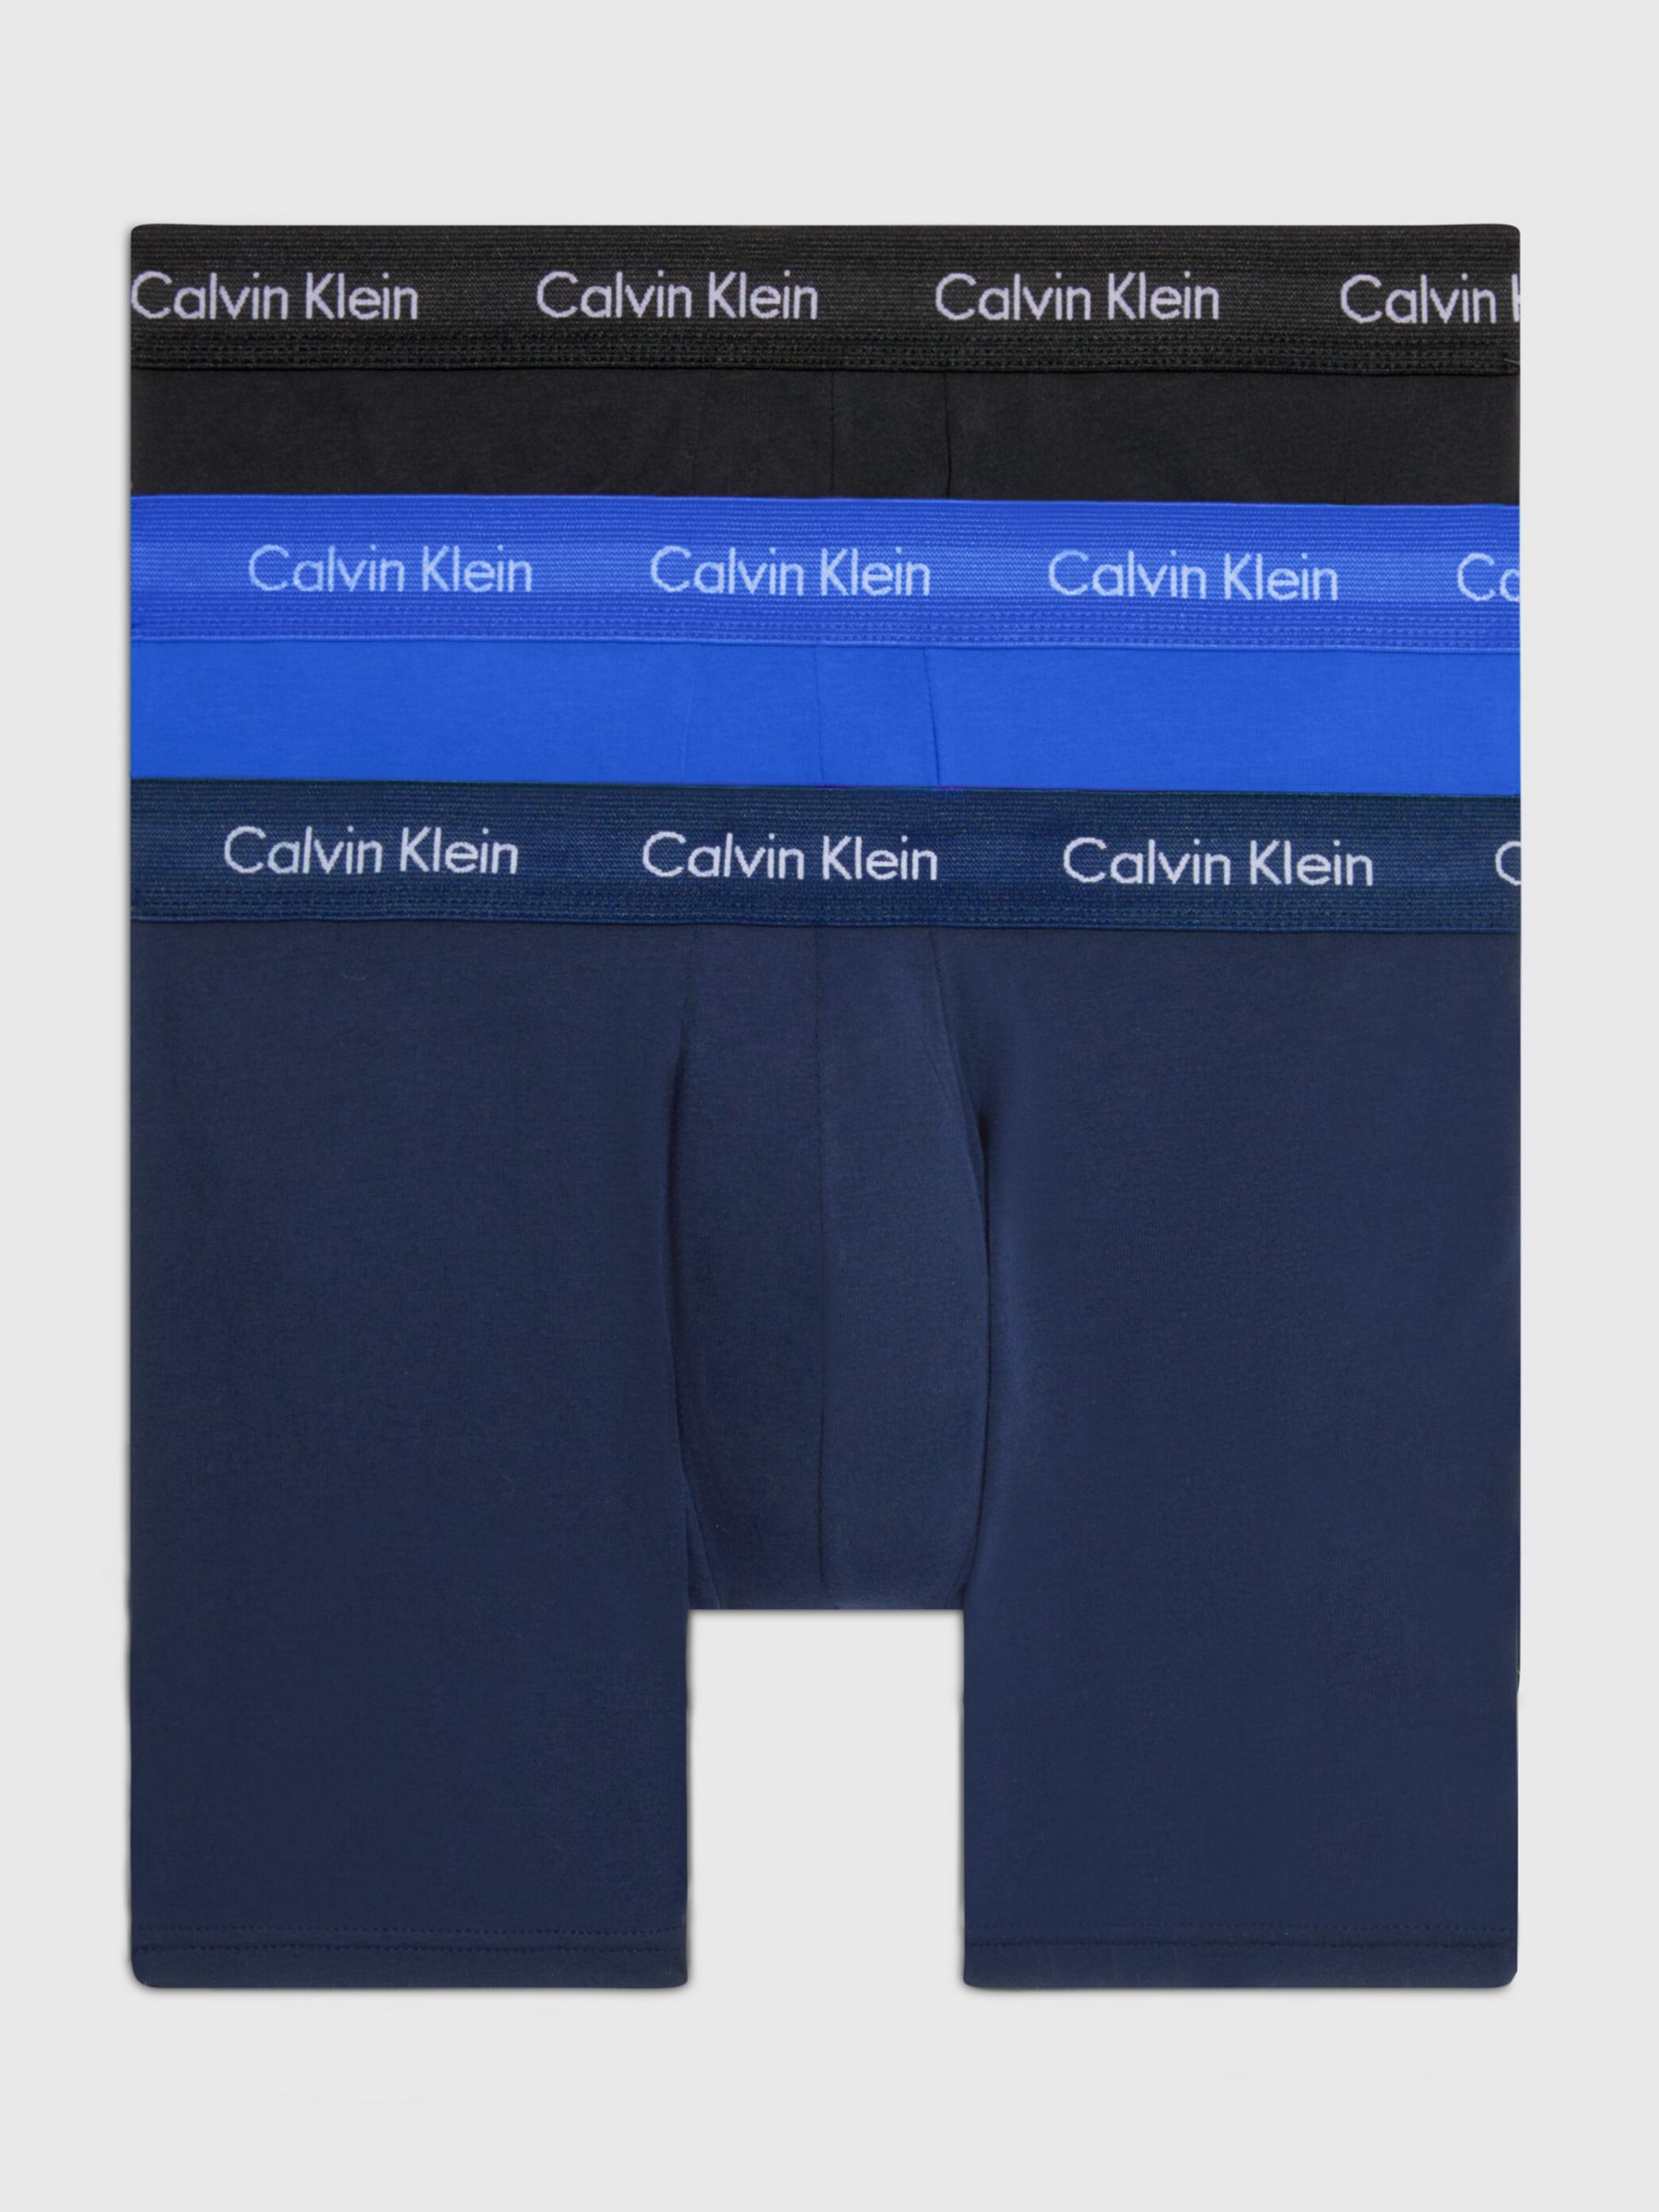 Sexy Brand Calvin Klein Panties On Bed Sheet, February 2022